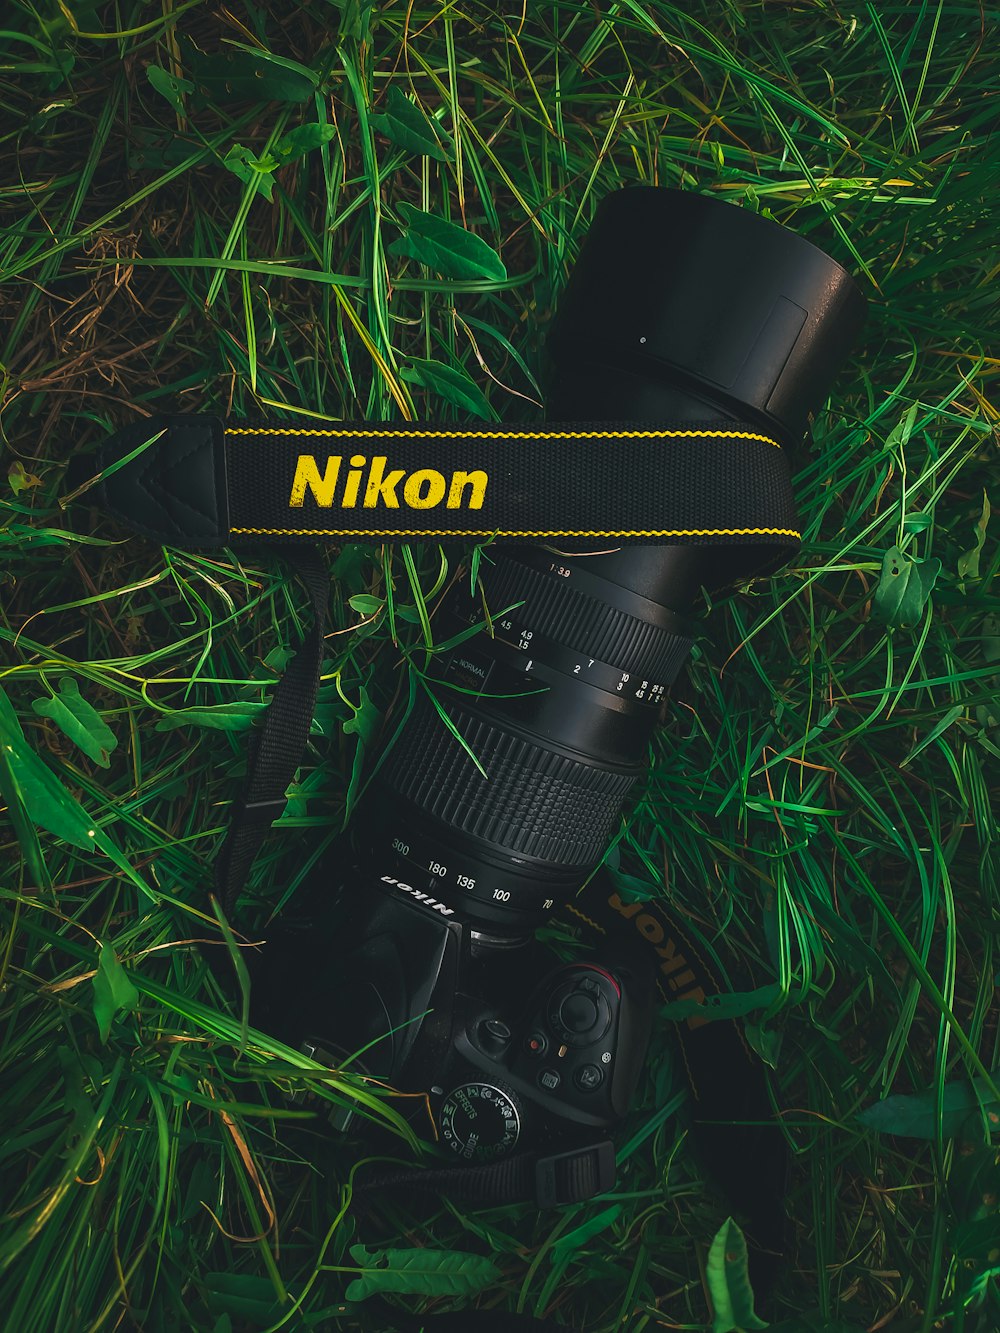 a nikon camera laying in the grass